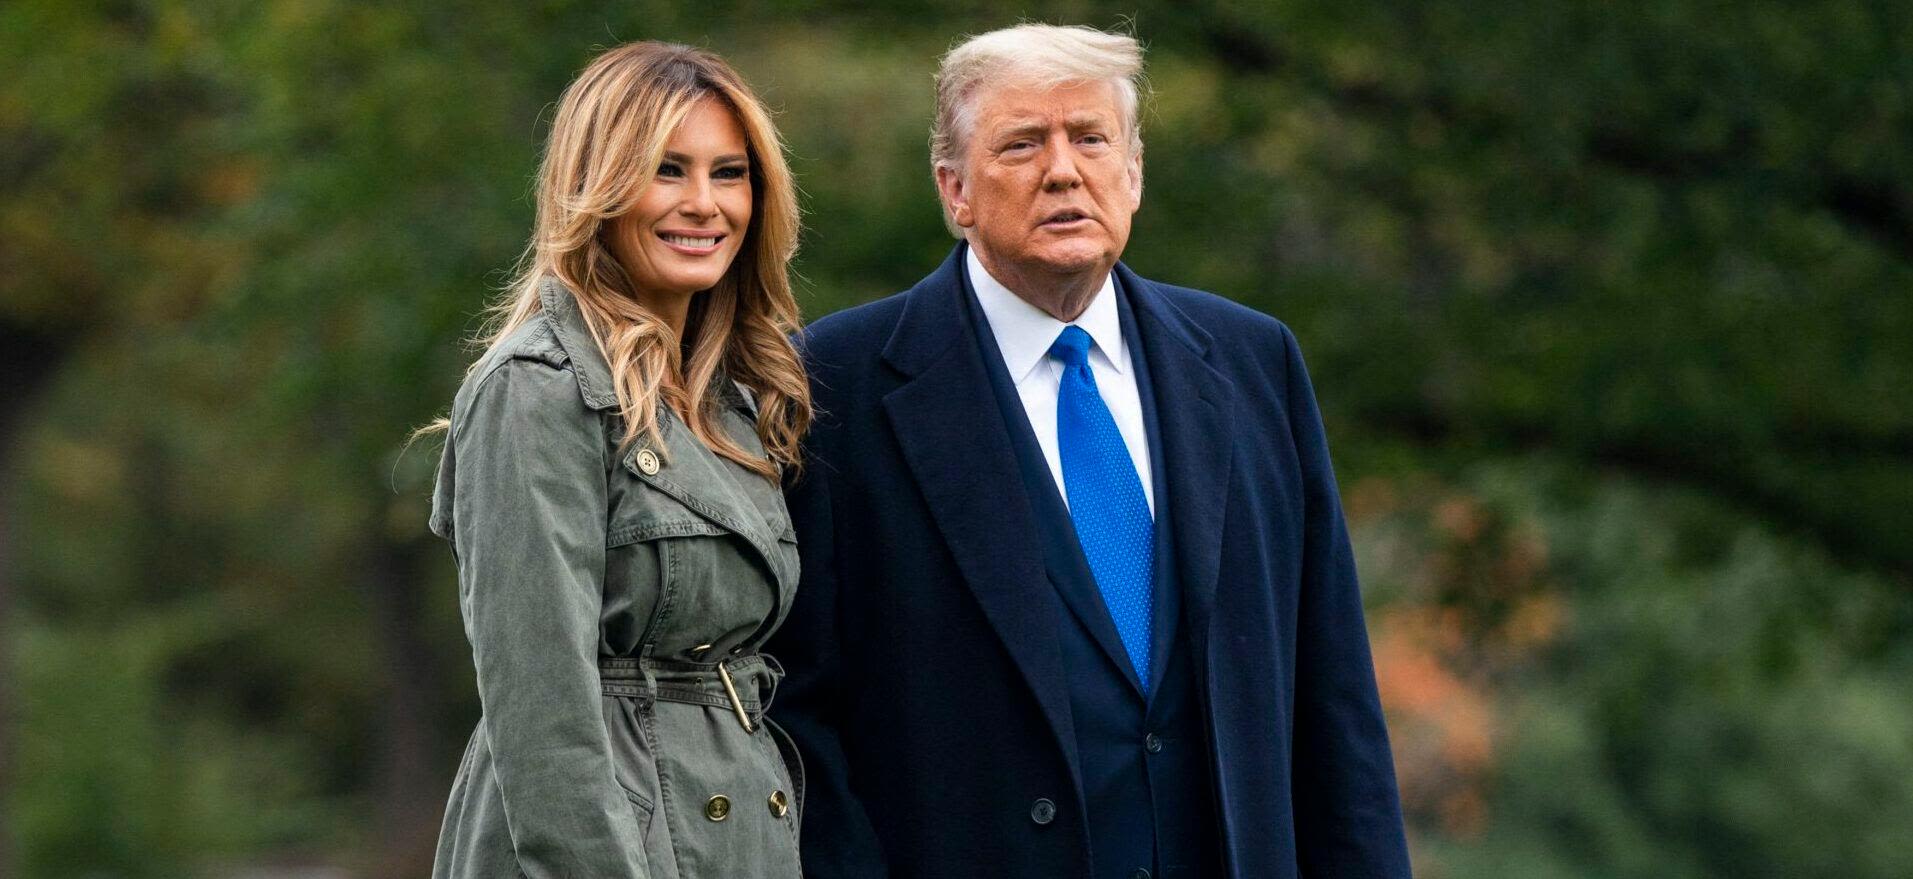 Melania Trump Stuns With A $42K Ostrich Hermès Bag For First Outing After Husband's Guilty Verdict